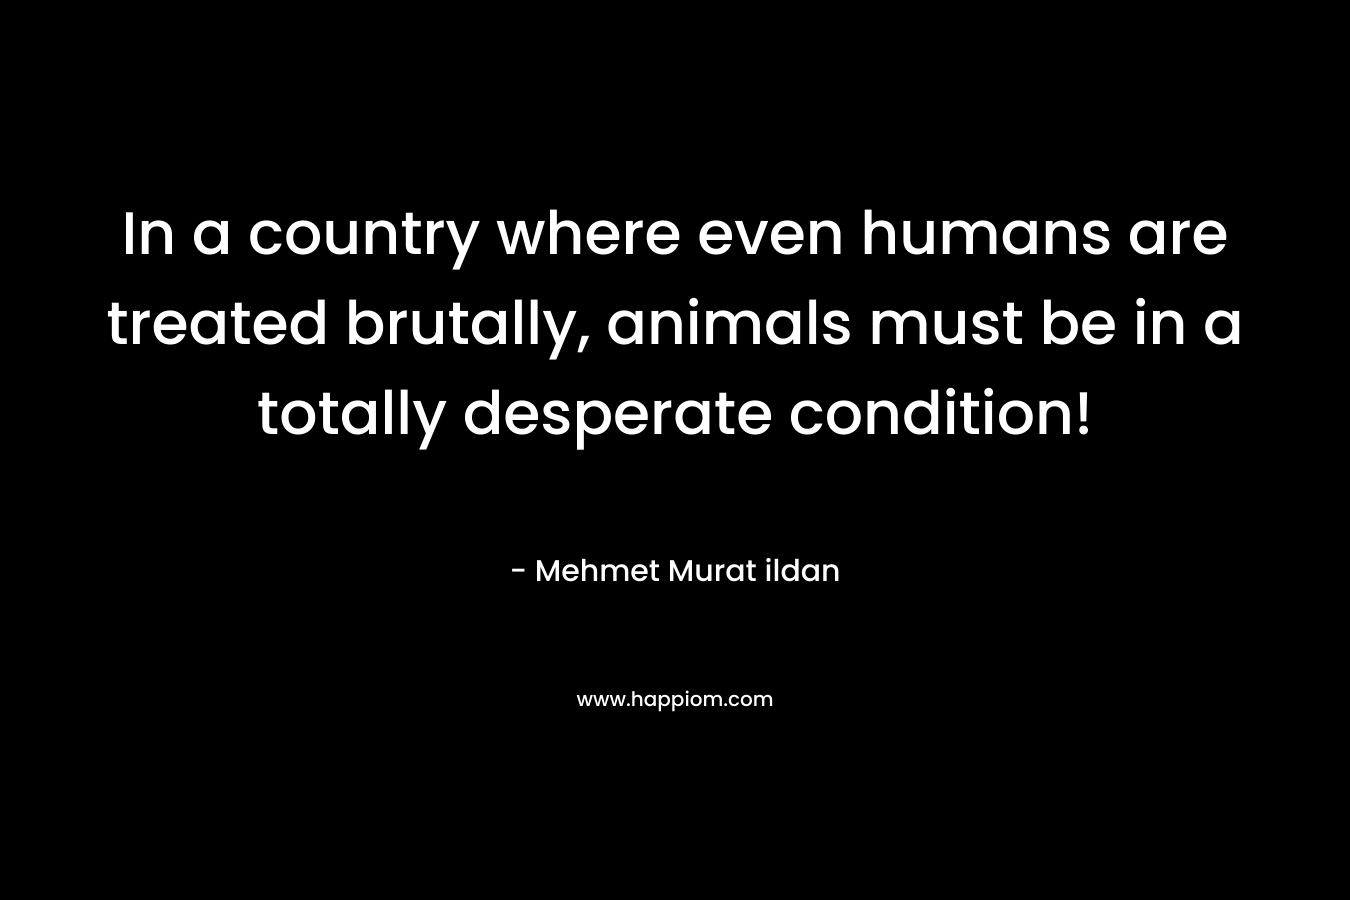 In a country where even humans are treated brutally, animals must be in a totally desperate condition!